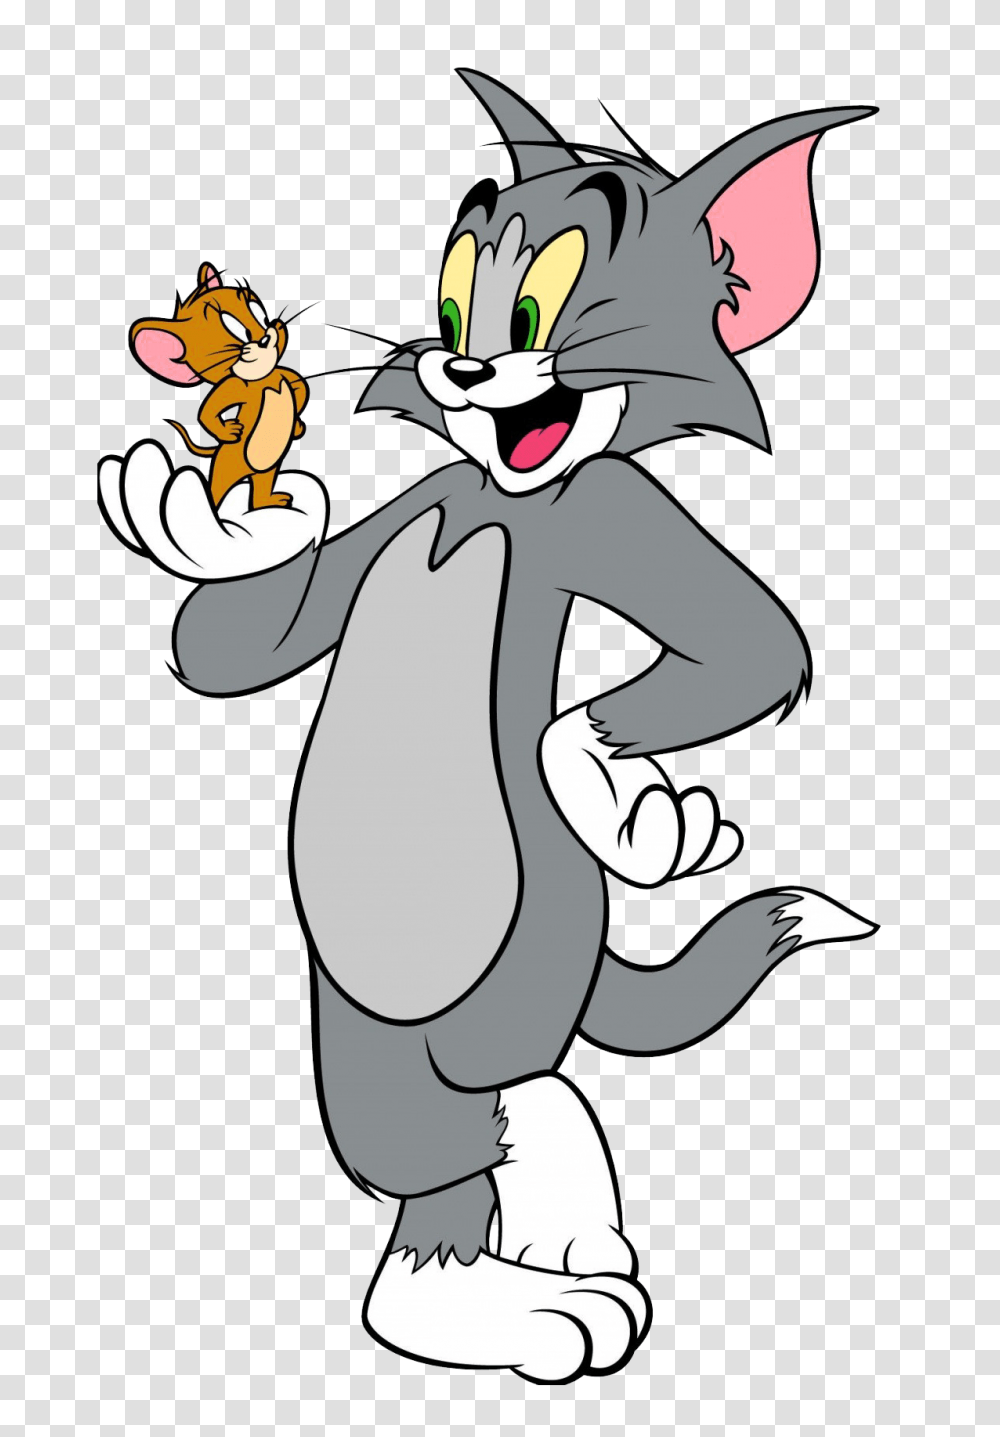 Tom And Jerry Cartoon Image Purepng Free Love Tom And Jerry, Animal, Mammal, Book, Comics Transparent Png